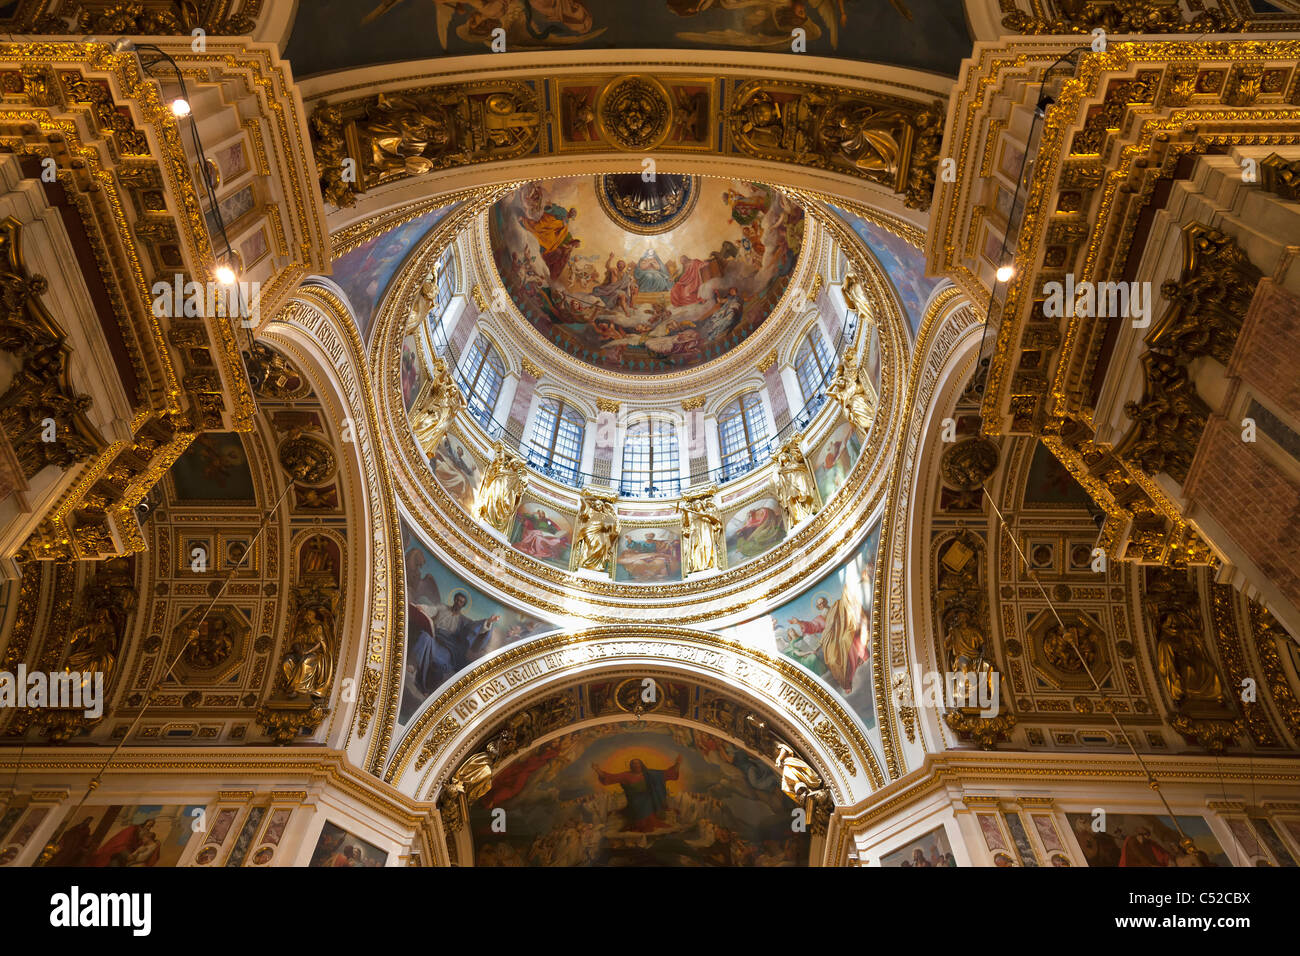 Saint Isaac's Cathedral, St. Petersburg Russia – interior Stock Photo